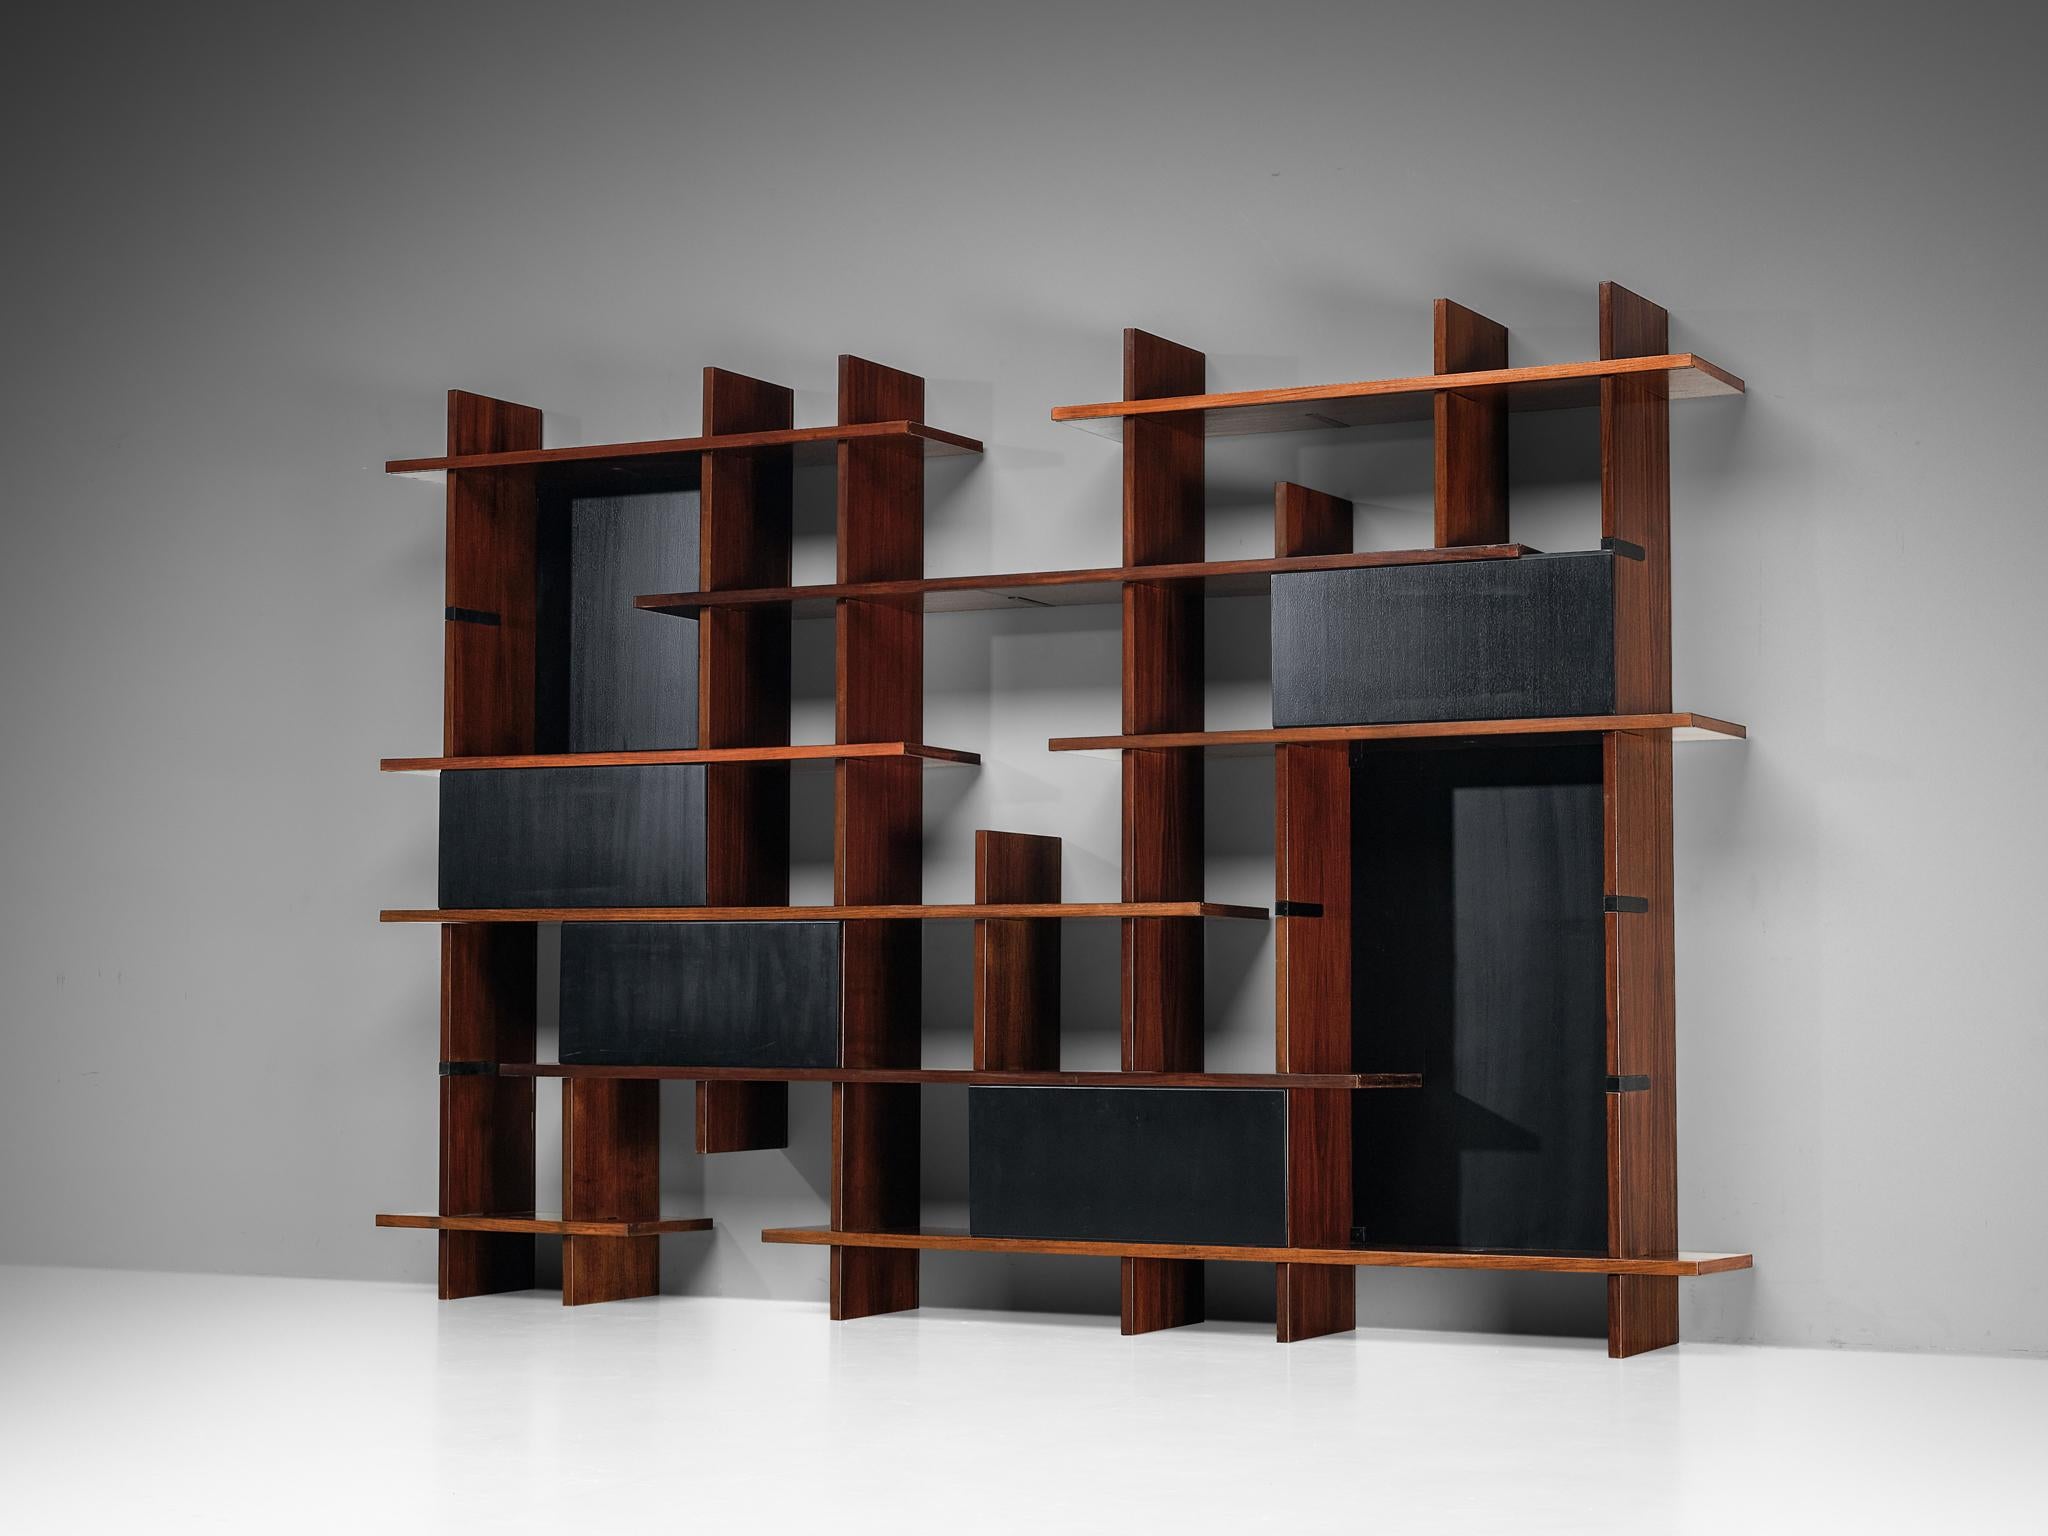 Eugenio Gerli for Tecno ,'Domino' library, wood, black lacquered wood, Italy, 1966

Modern and attractive modular bookcase system designed by Eugenio Gerli for Tecno in 1966. This piece can be build up in various compositions. It has basic